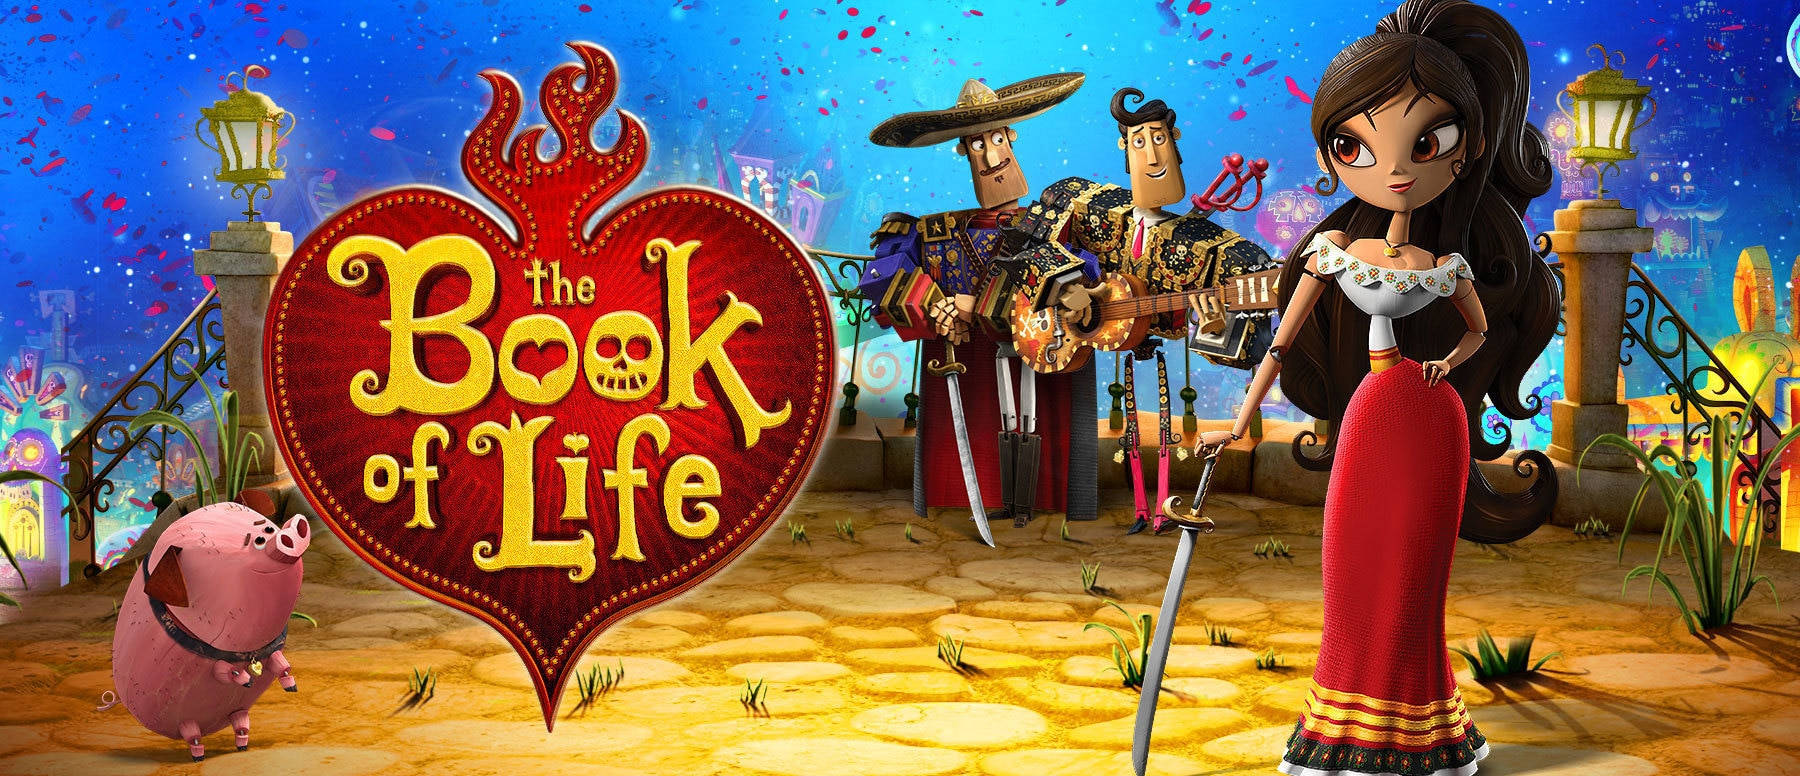 The Book Of Life Maria With Sword Wallpaper